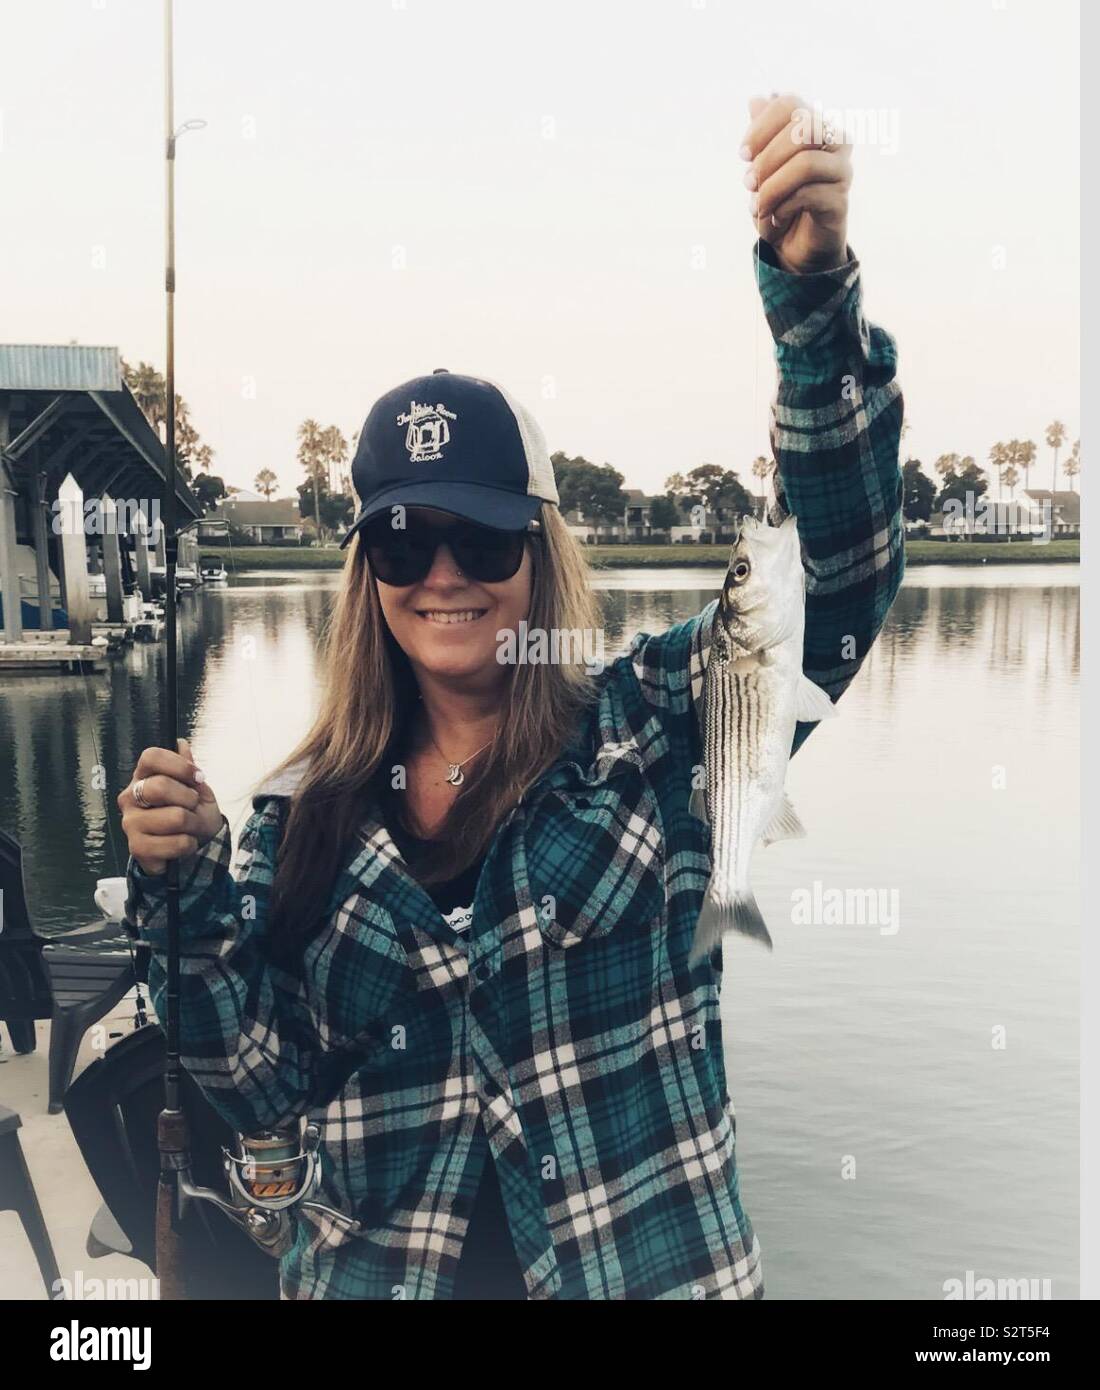 Woman wearing a flannel and trucker hat, just caught a fish, holding the fish in the line, water, trees and Marina in background, daytime Stock Photo